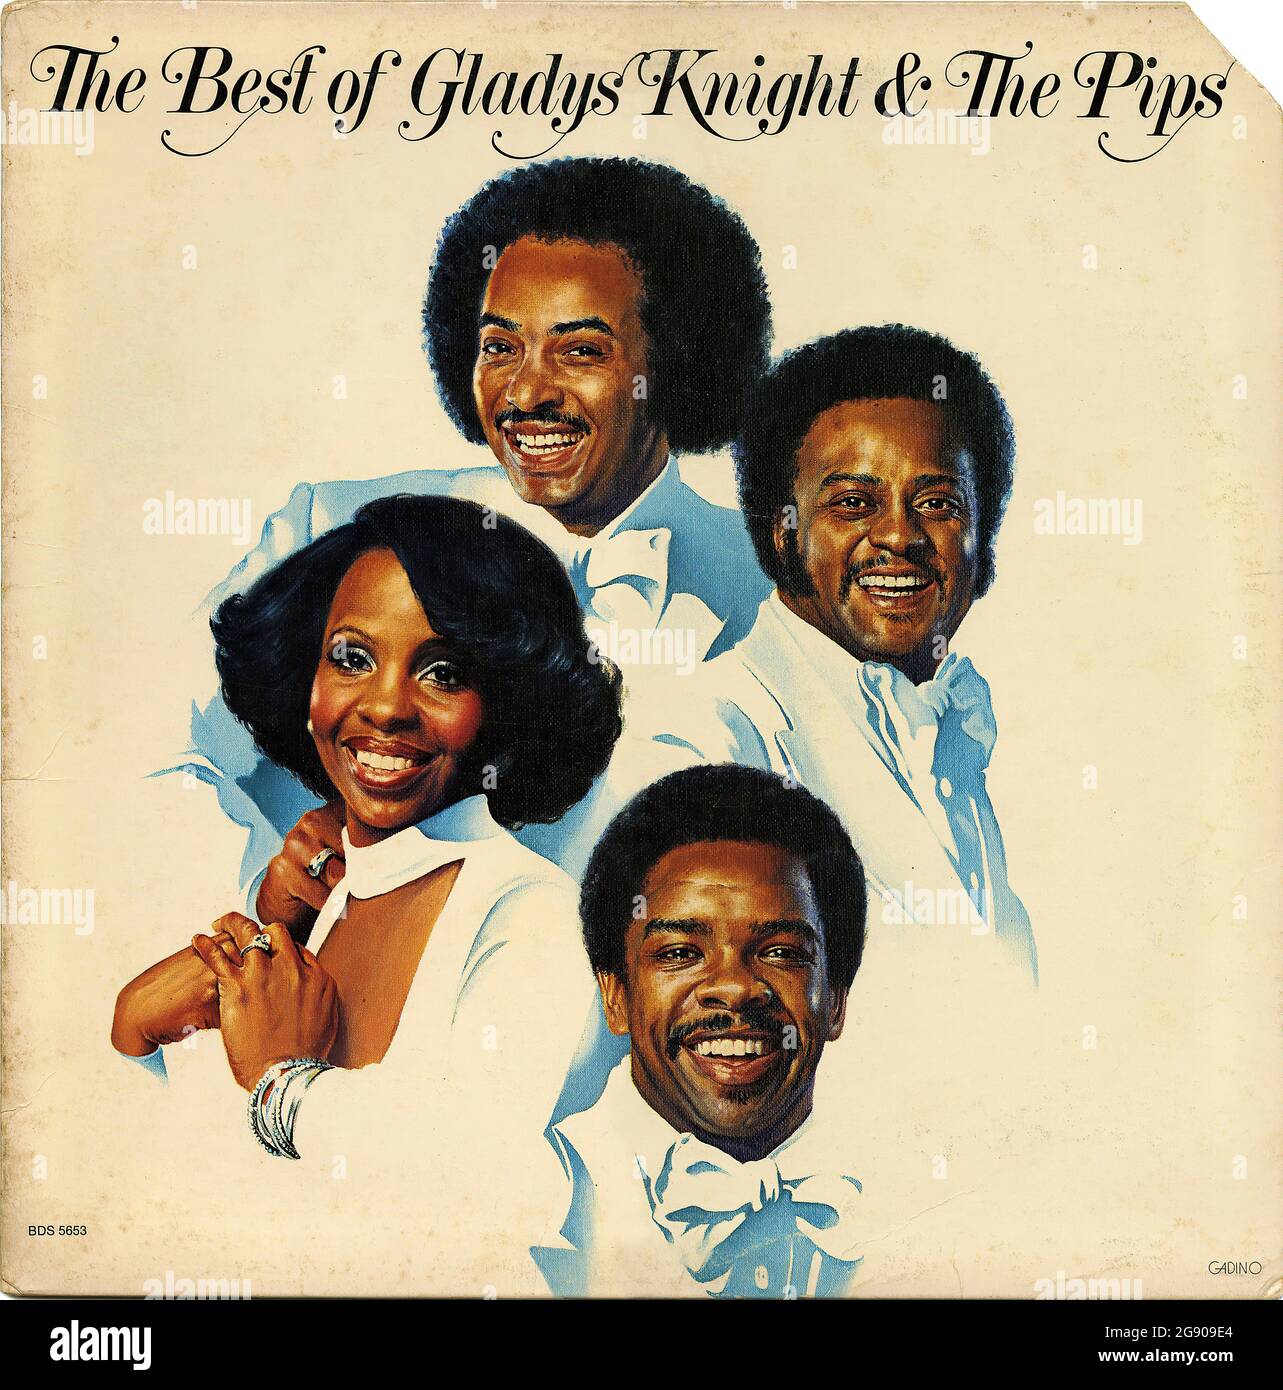 The Best Of Gladys Knight And The Pips -  Vintage Vinyl Record Cover Stock Photo